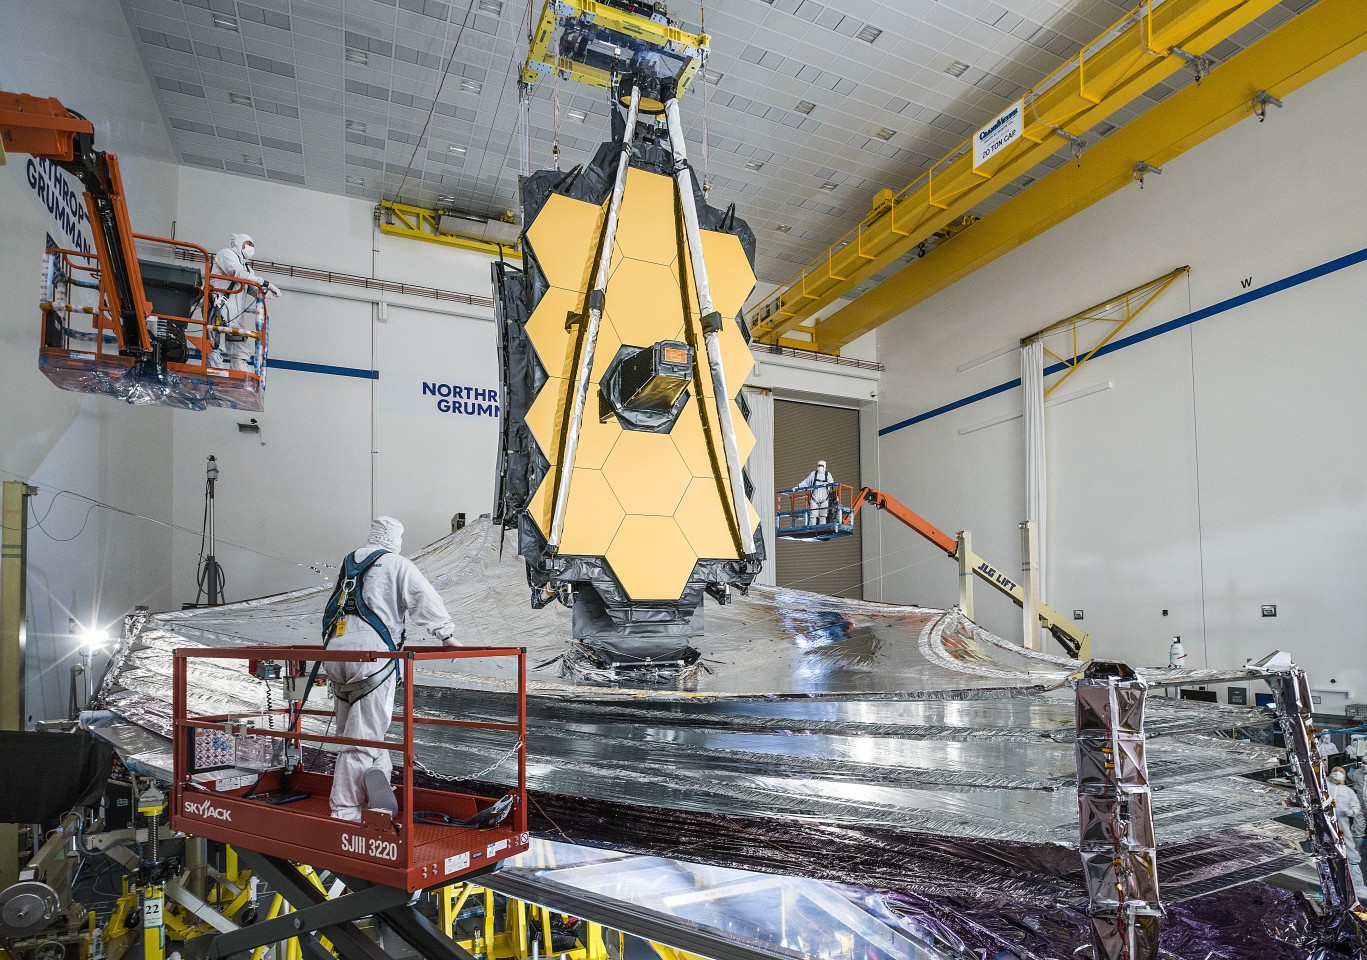 A next-generation observatory has inched closer to lift-off, with NASA unfolding the James Webb Space Telescope’s five-layer sunshield in the same way it expects it to after arriving in orbit